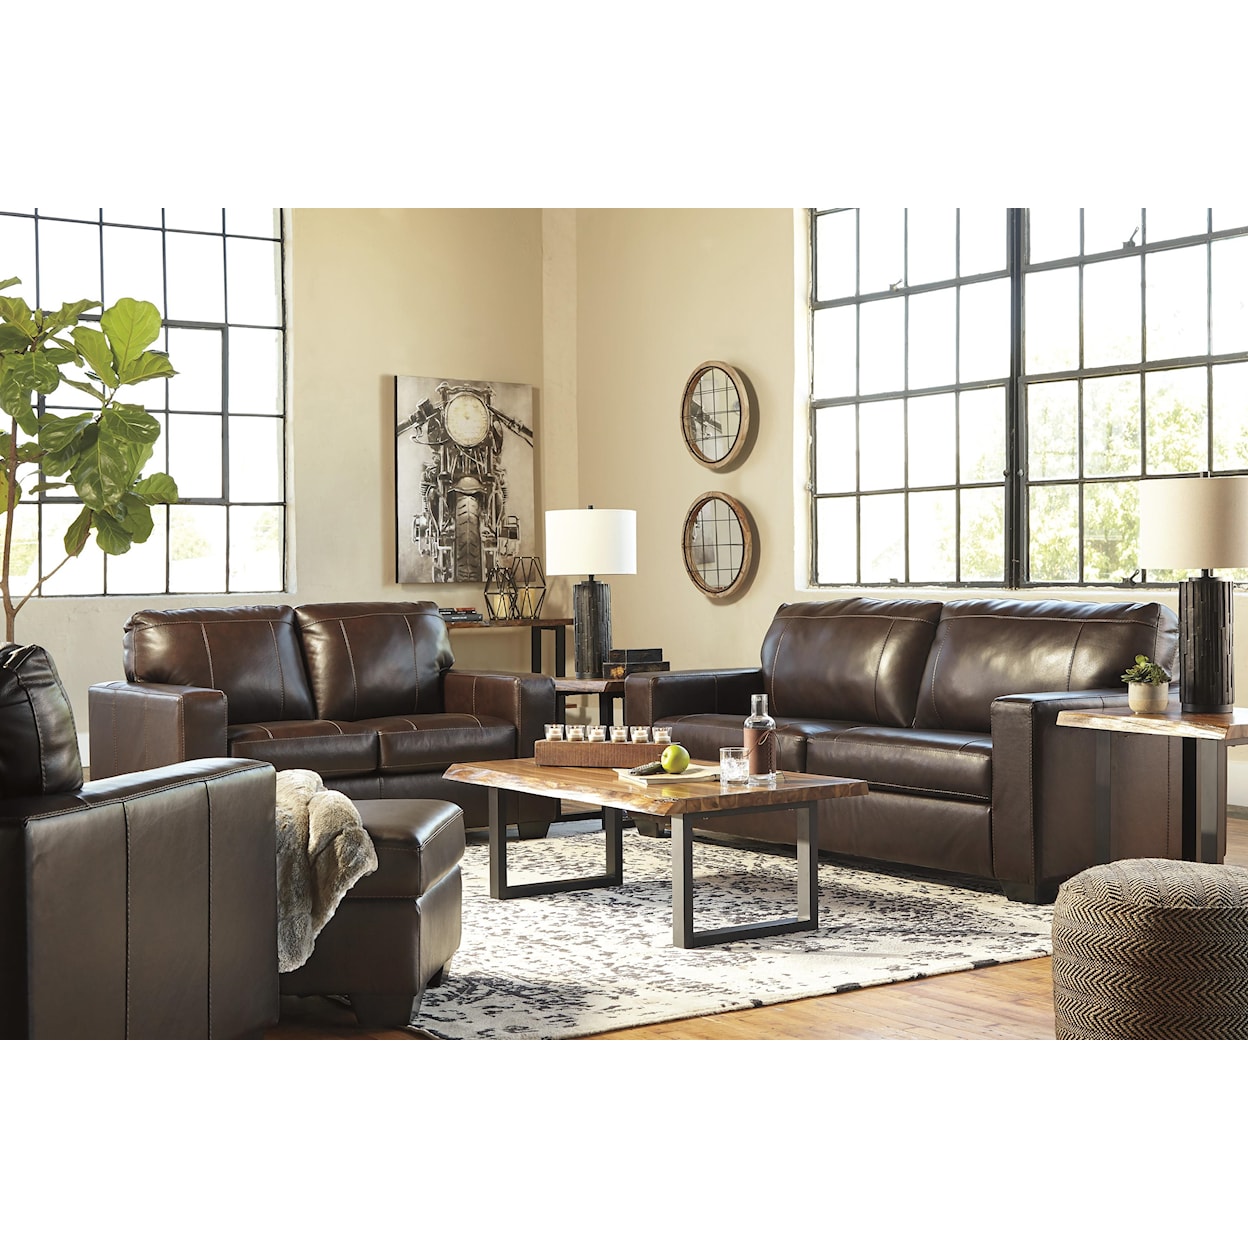 Signature Design by Ashley Morelos Sofa, Chair and Ottoman Set